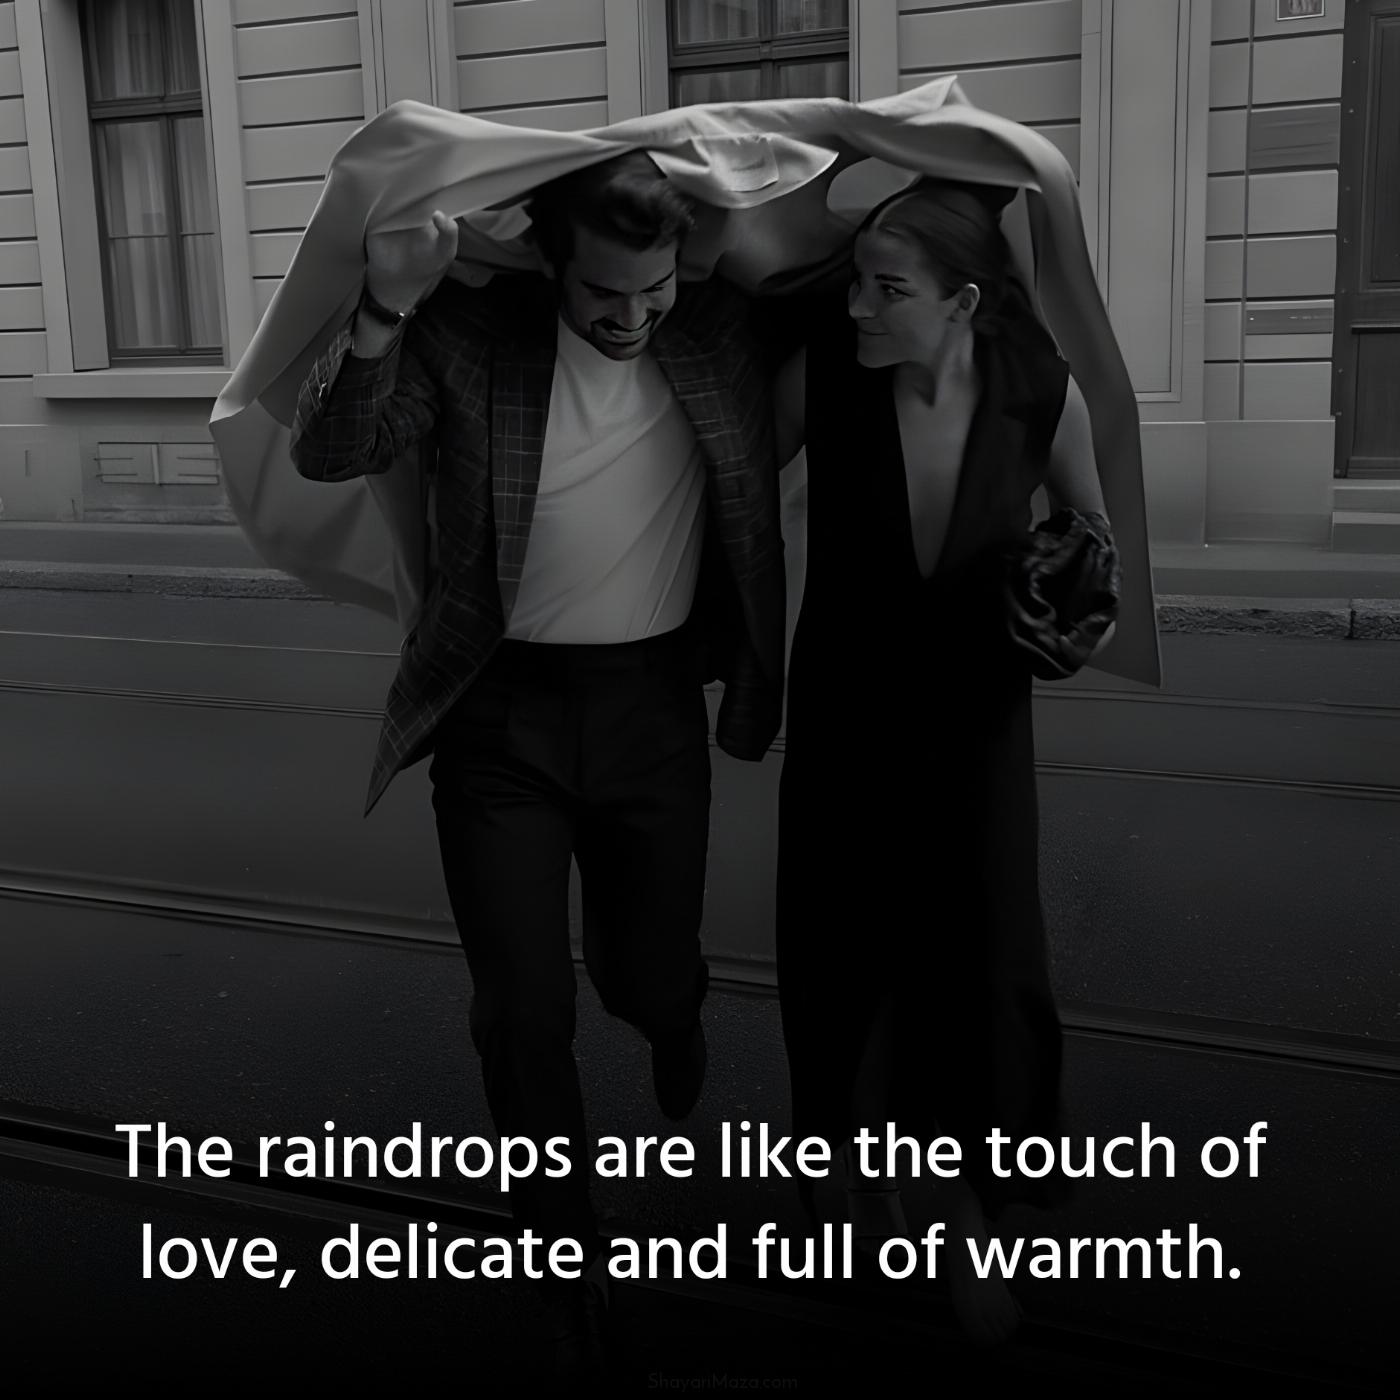 The raindrops are like the touch of love